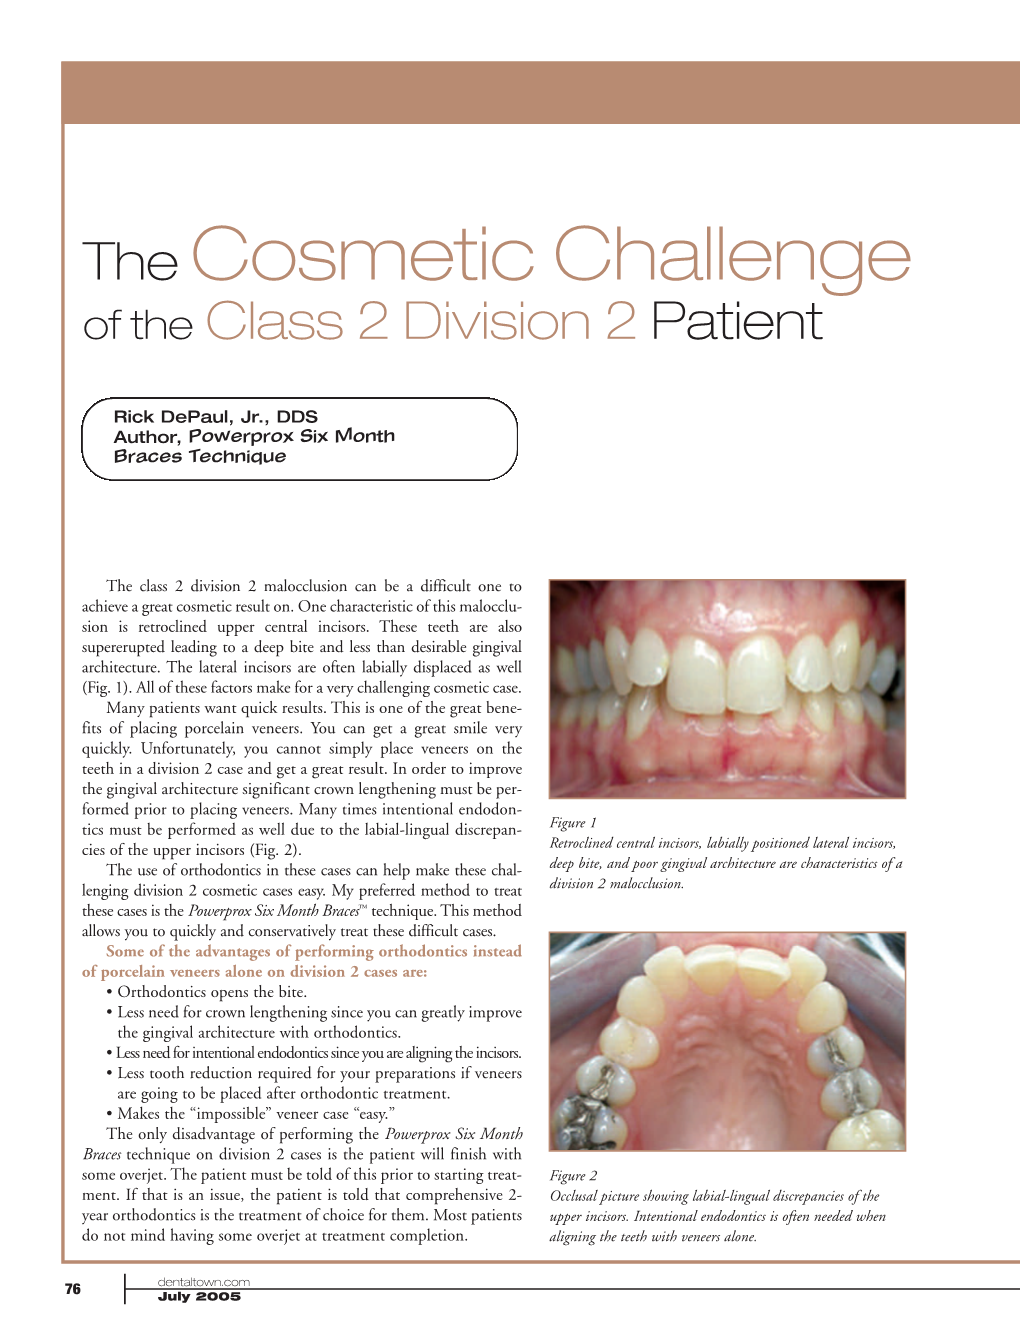 The Cosmetic Challenge of the Class 2 Division 2 Patient